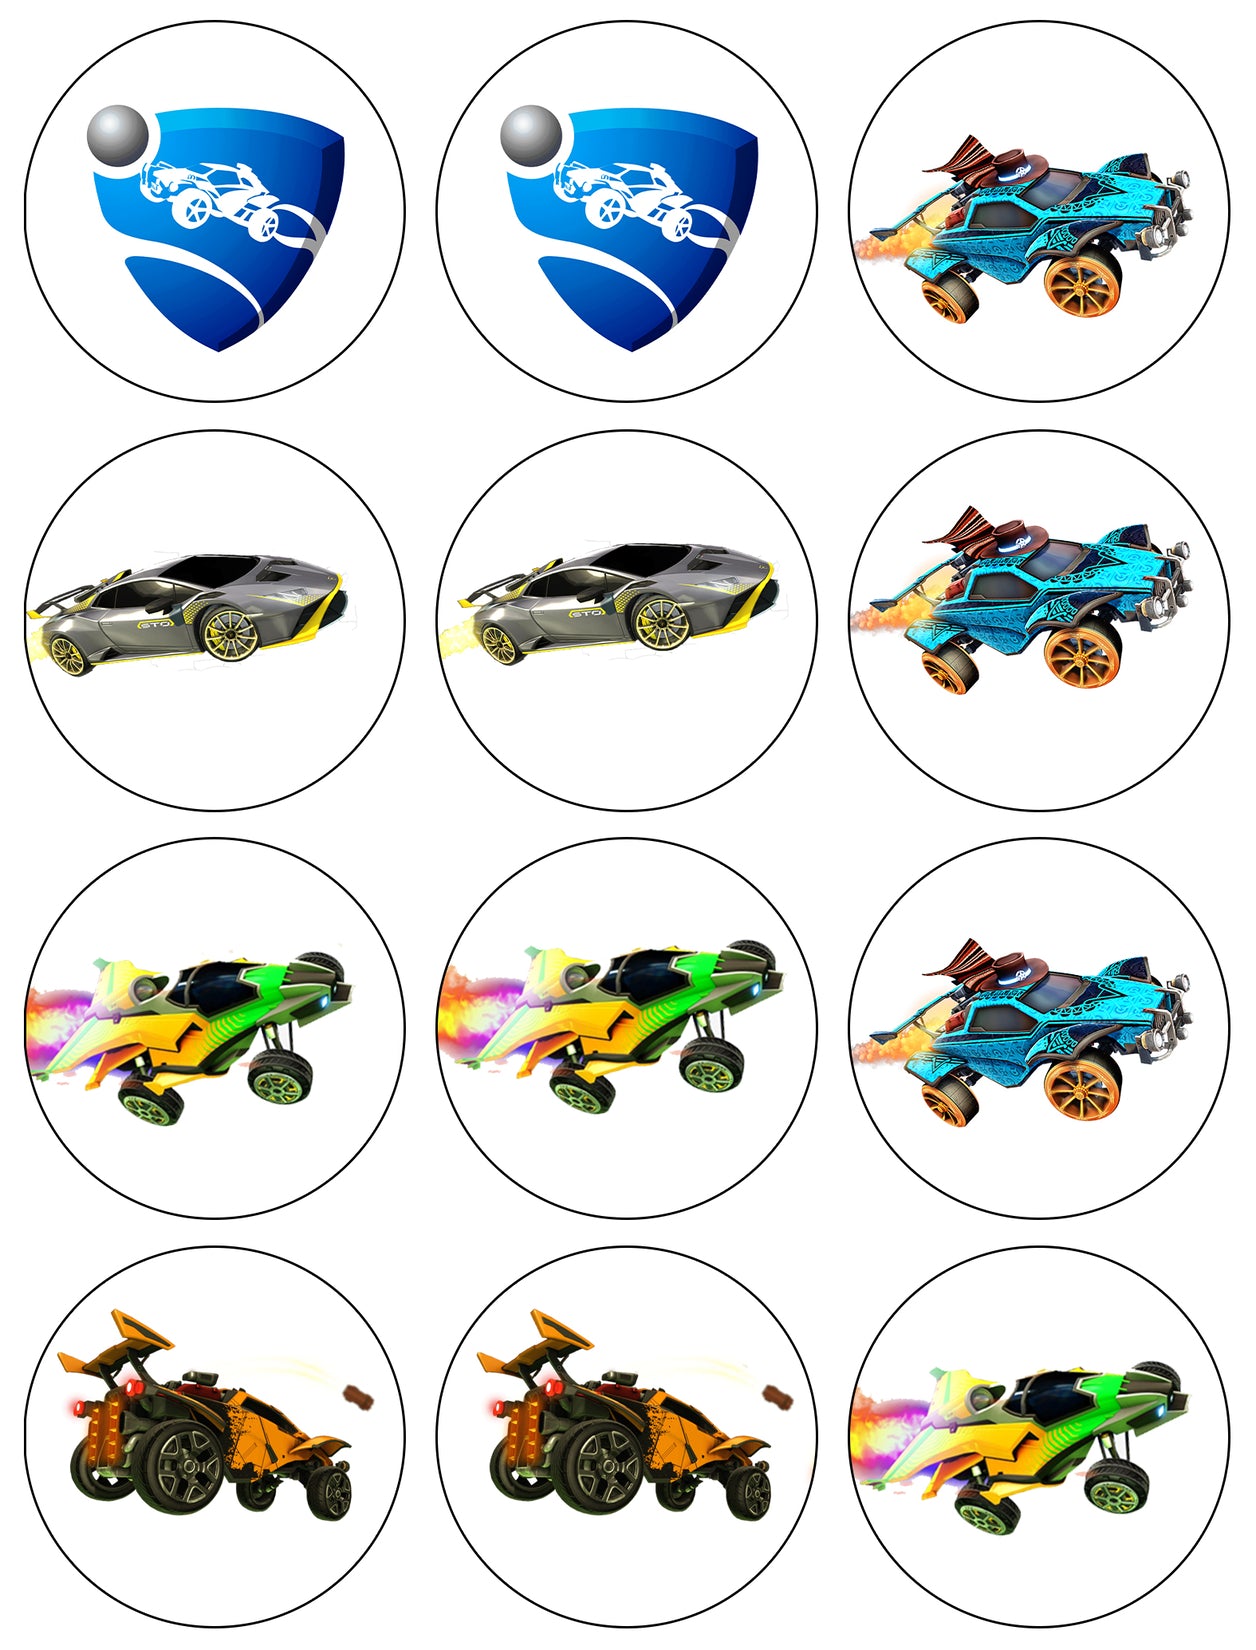 Rocket League Cars and Logo Cupcake Images ABPID56591 – A Birthday Place